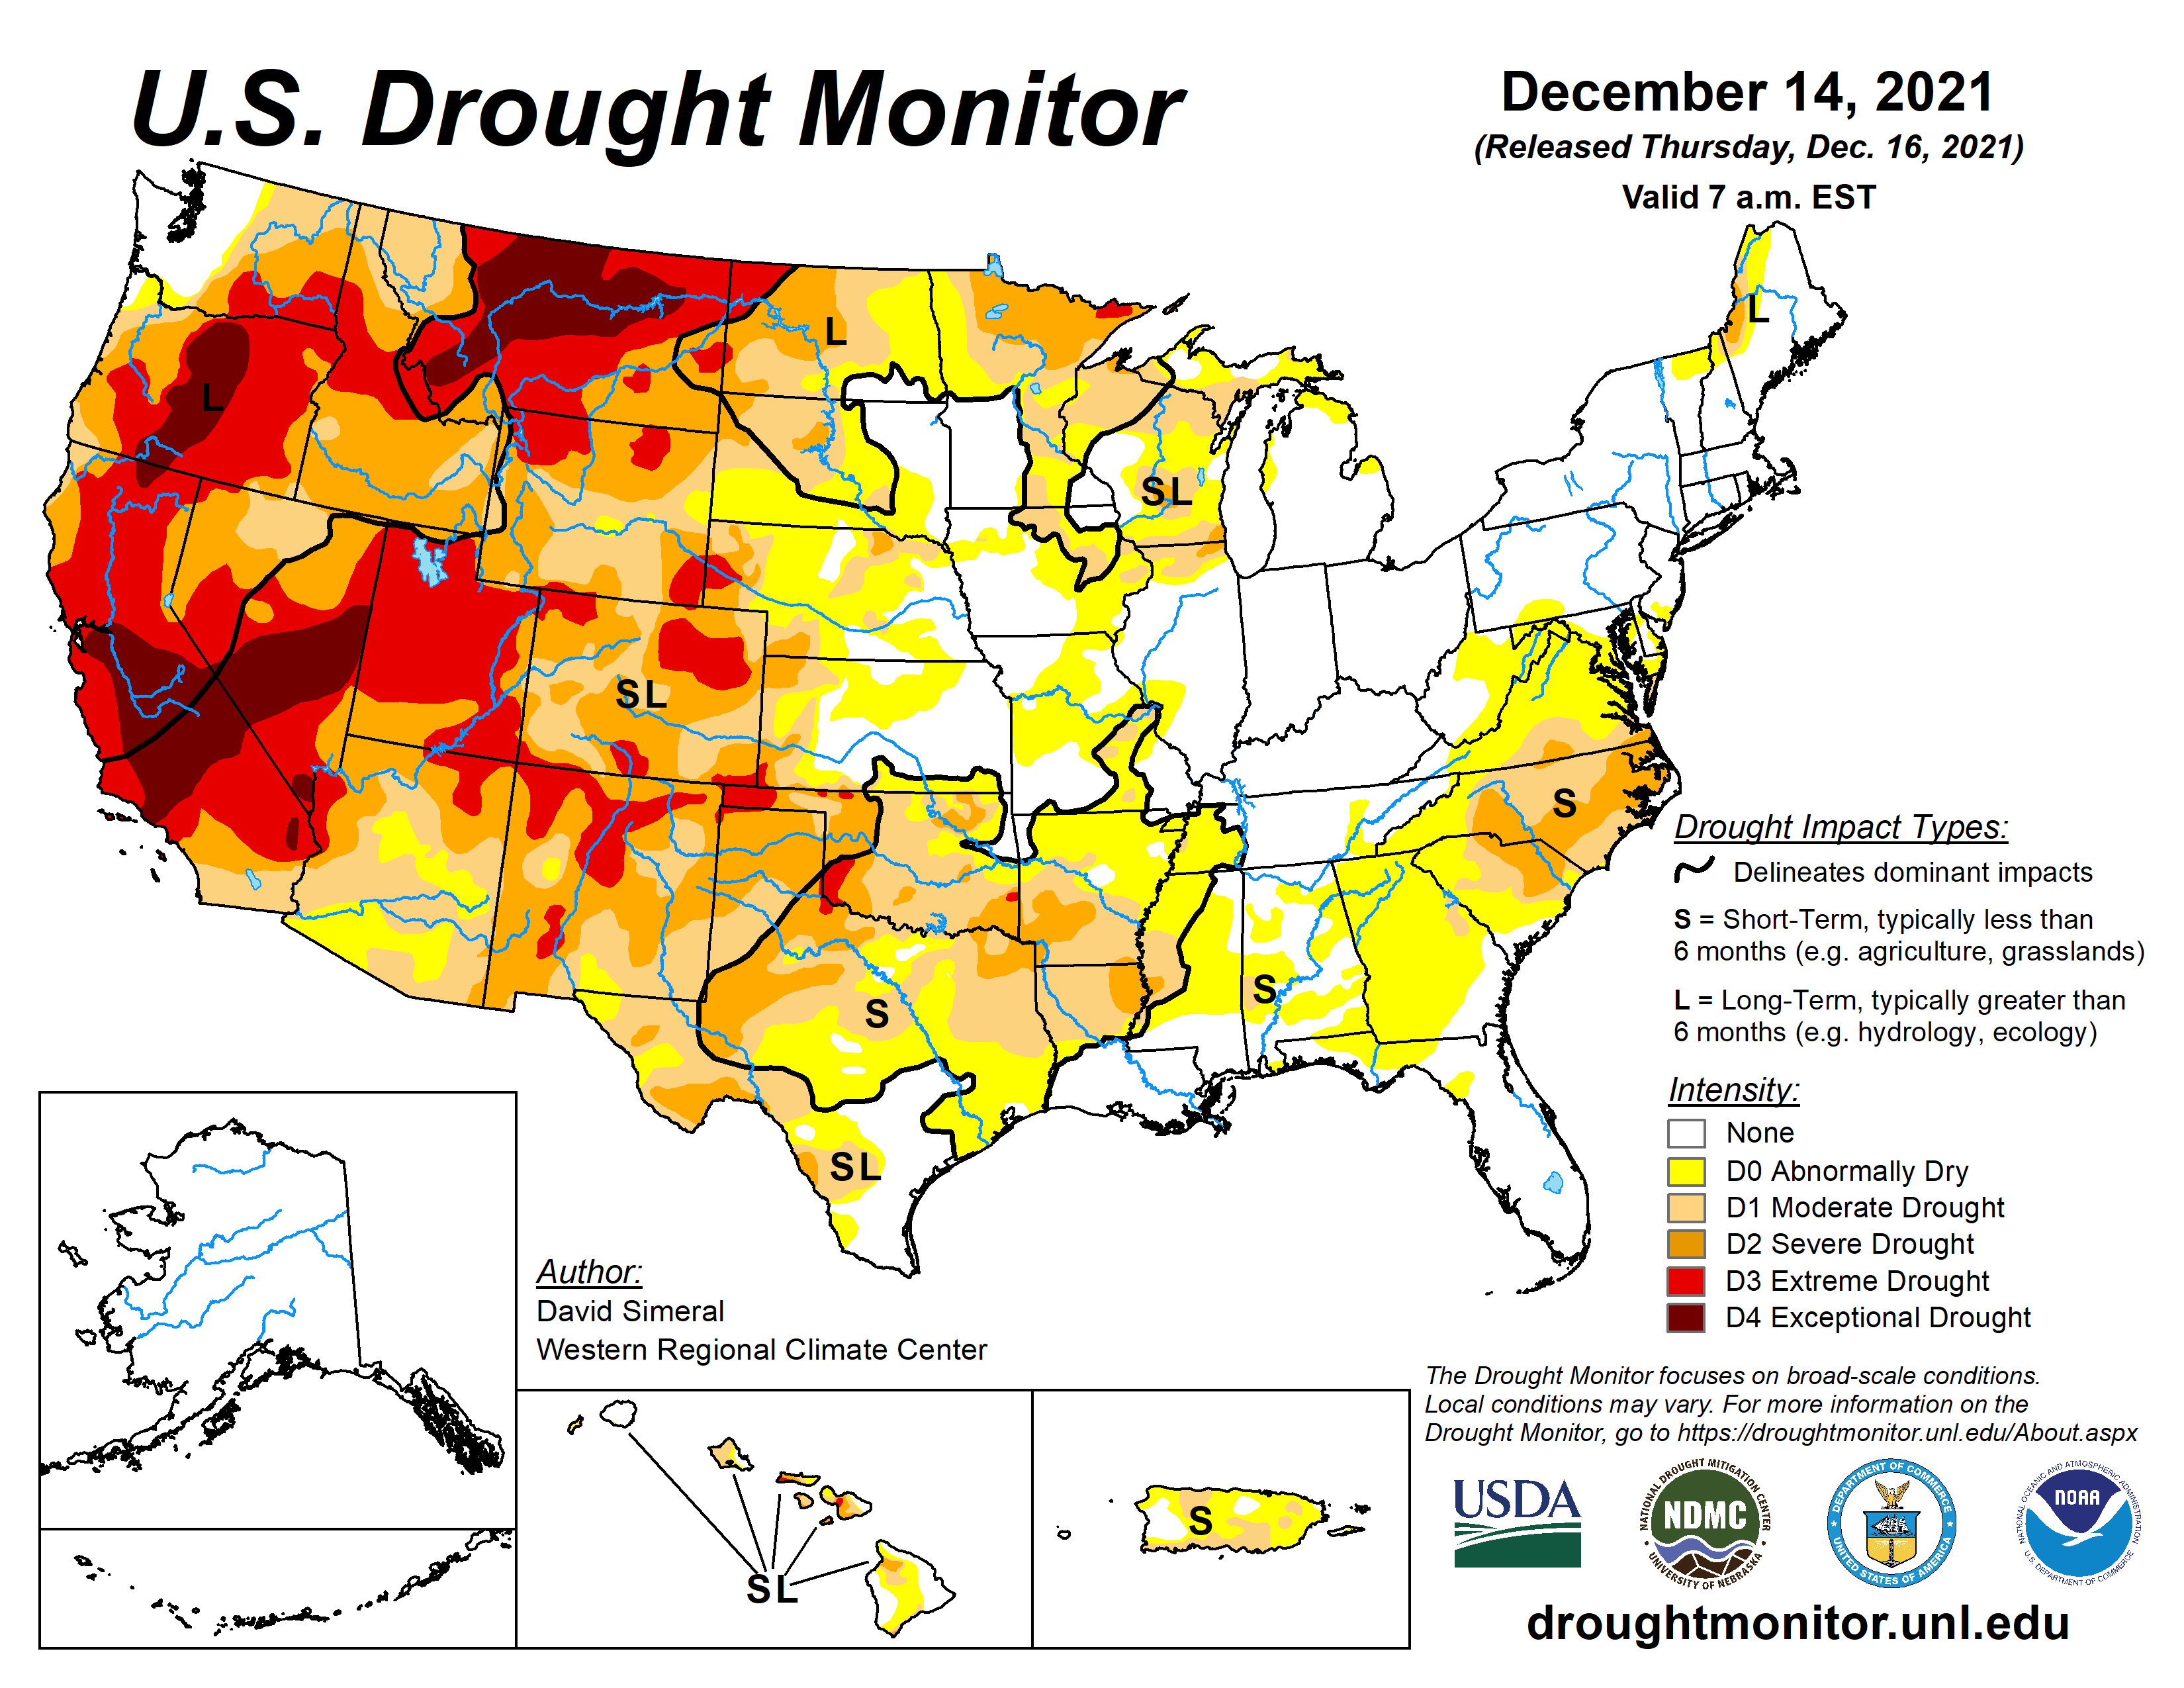 Map from December 2021 showing the distribution of drought conditions in the US. Much of the western US is in extreme or exceptional drought, especially California, Oregon, Montana, Nevada, and Utah.